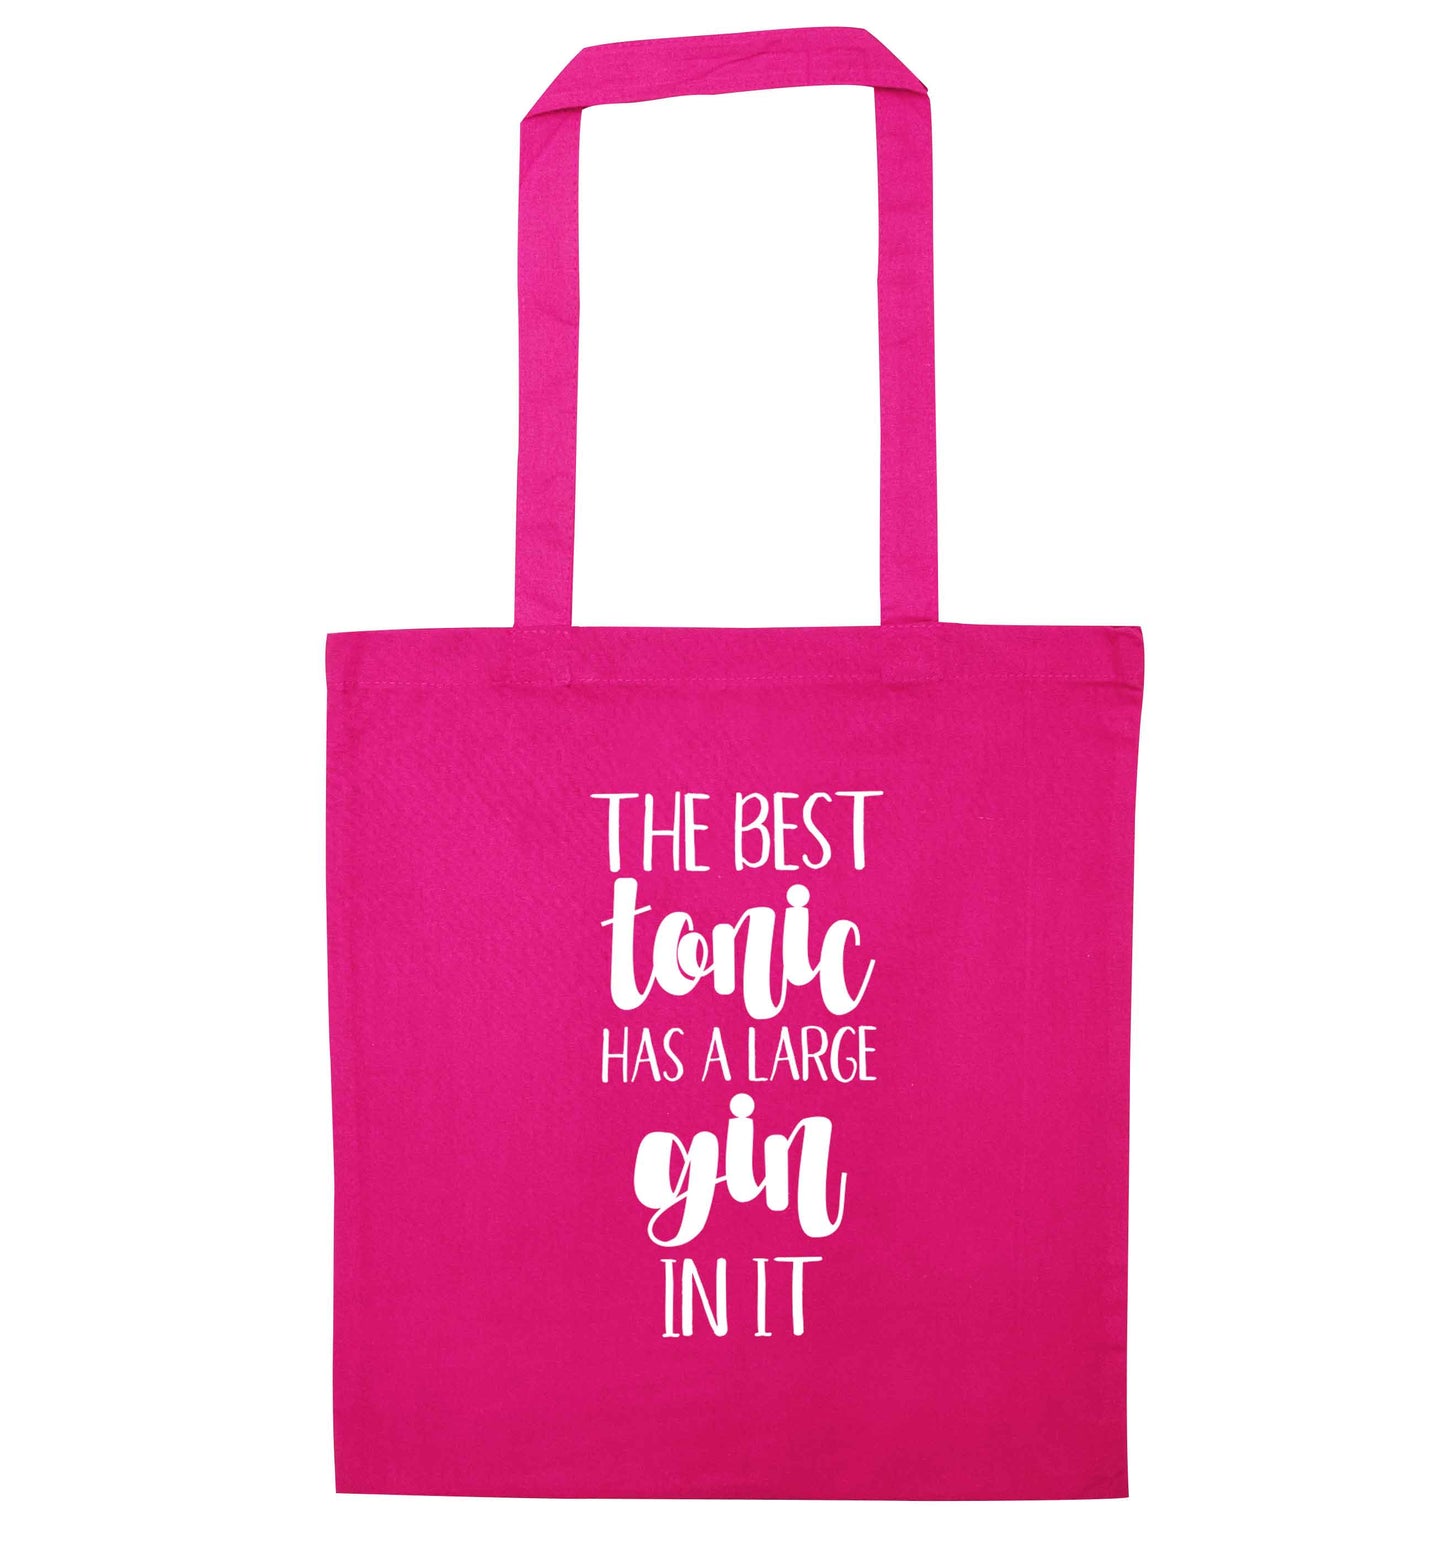 The best tonic has a large gin in it pink tote bag